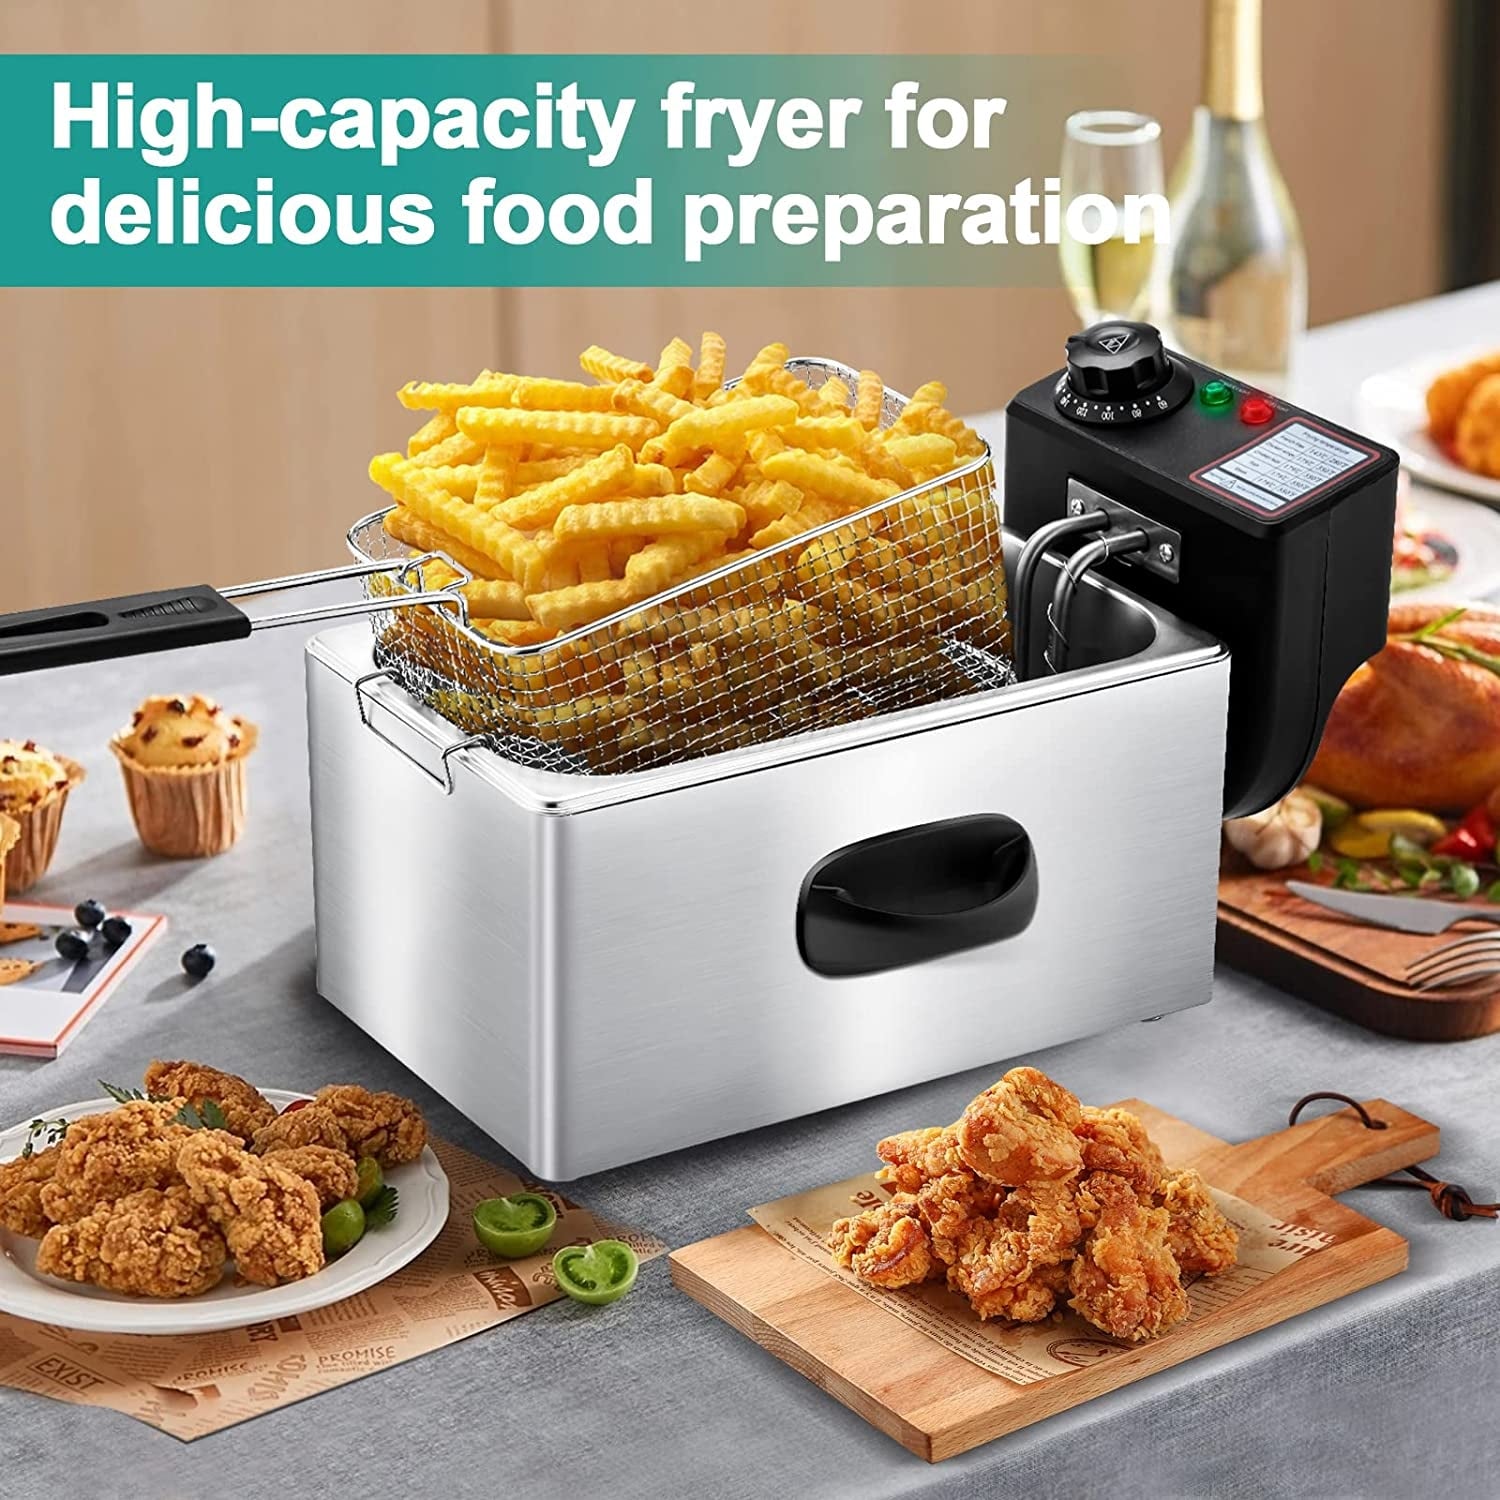 https://ak1.ostkcdn.com/images/products/is/images/direct/56c8091cf3a8dfc65b723459e3f4044884a749f3/Deep-Fryer-with-Basket%2C-4.2-Qt-Stainless-Steel-Electric-Deep-Fryer-1650W-Oil-Fryer-Pot.jpg